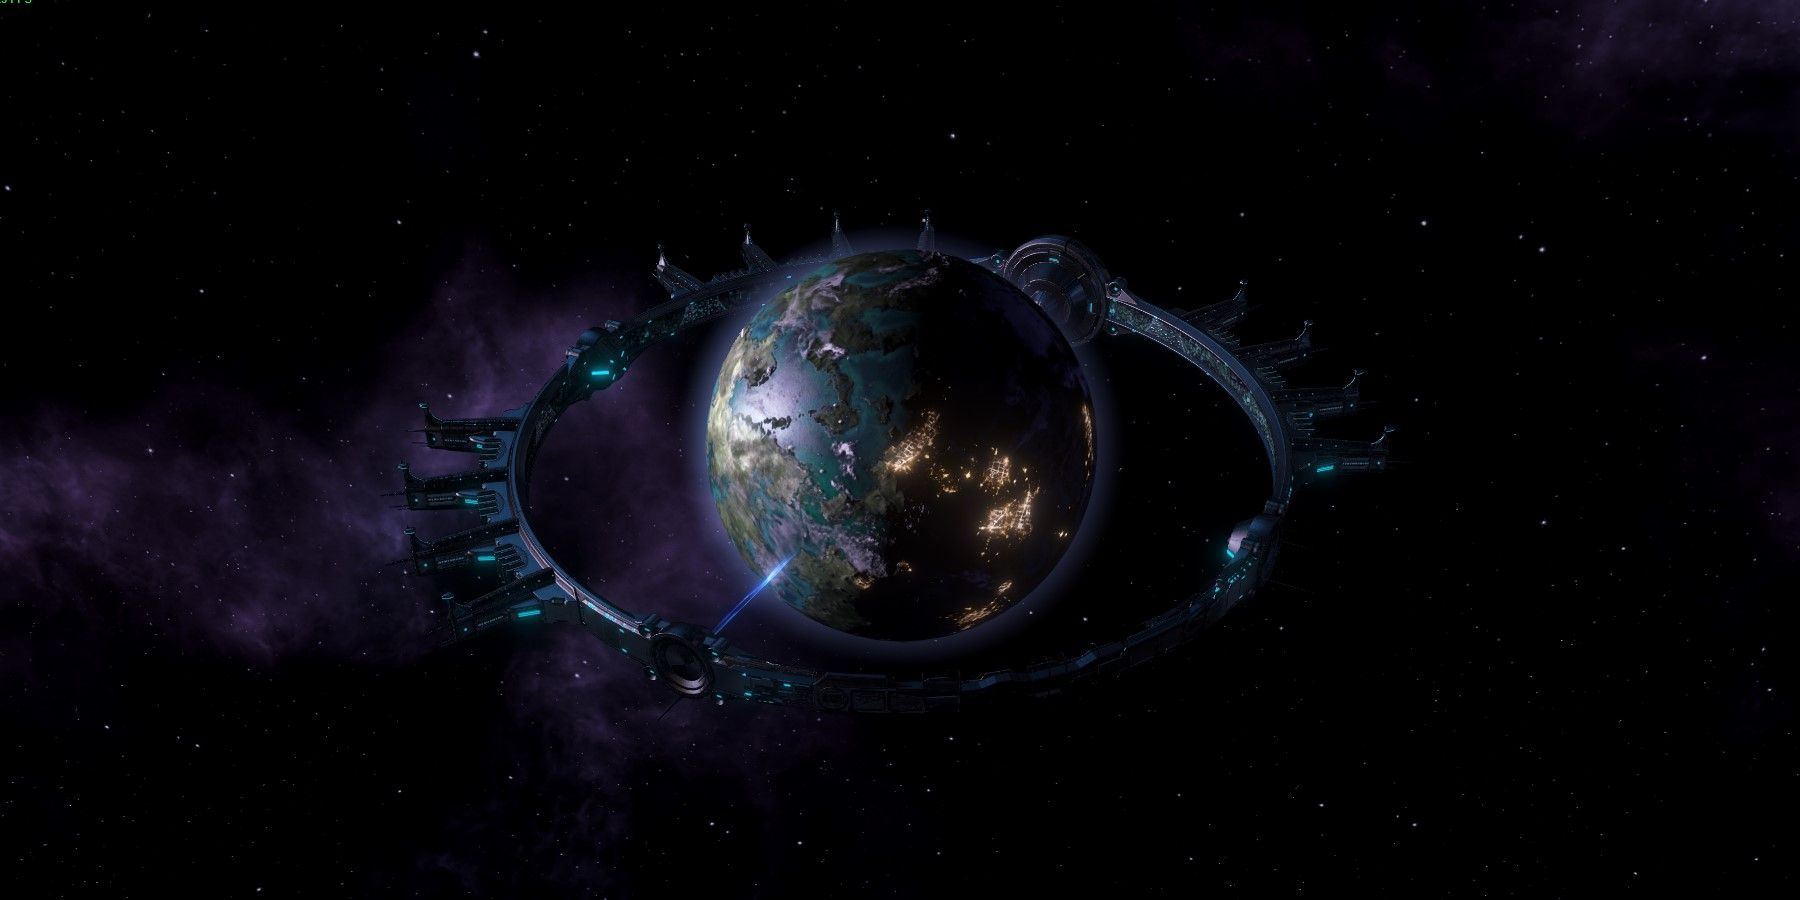 Stellaris: The right way to Construct an Orbital Ring